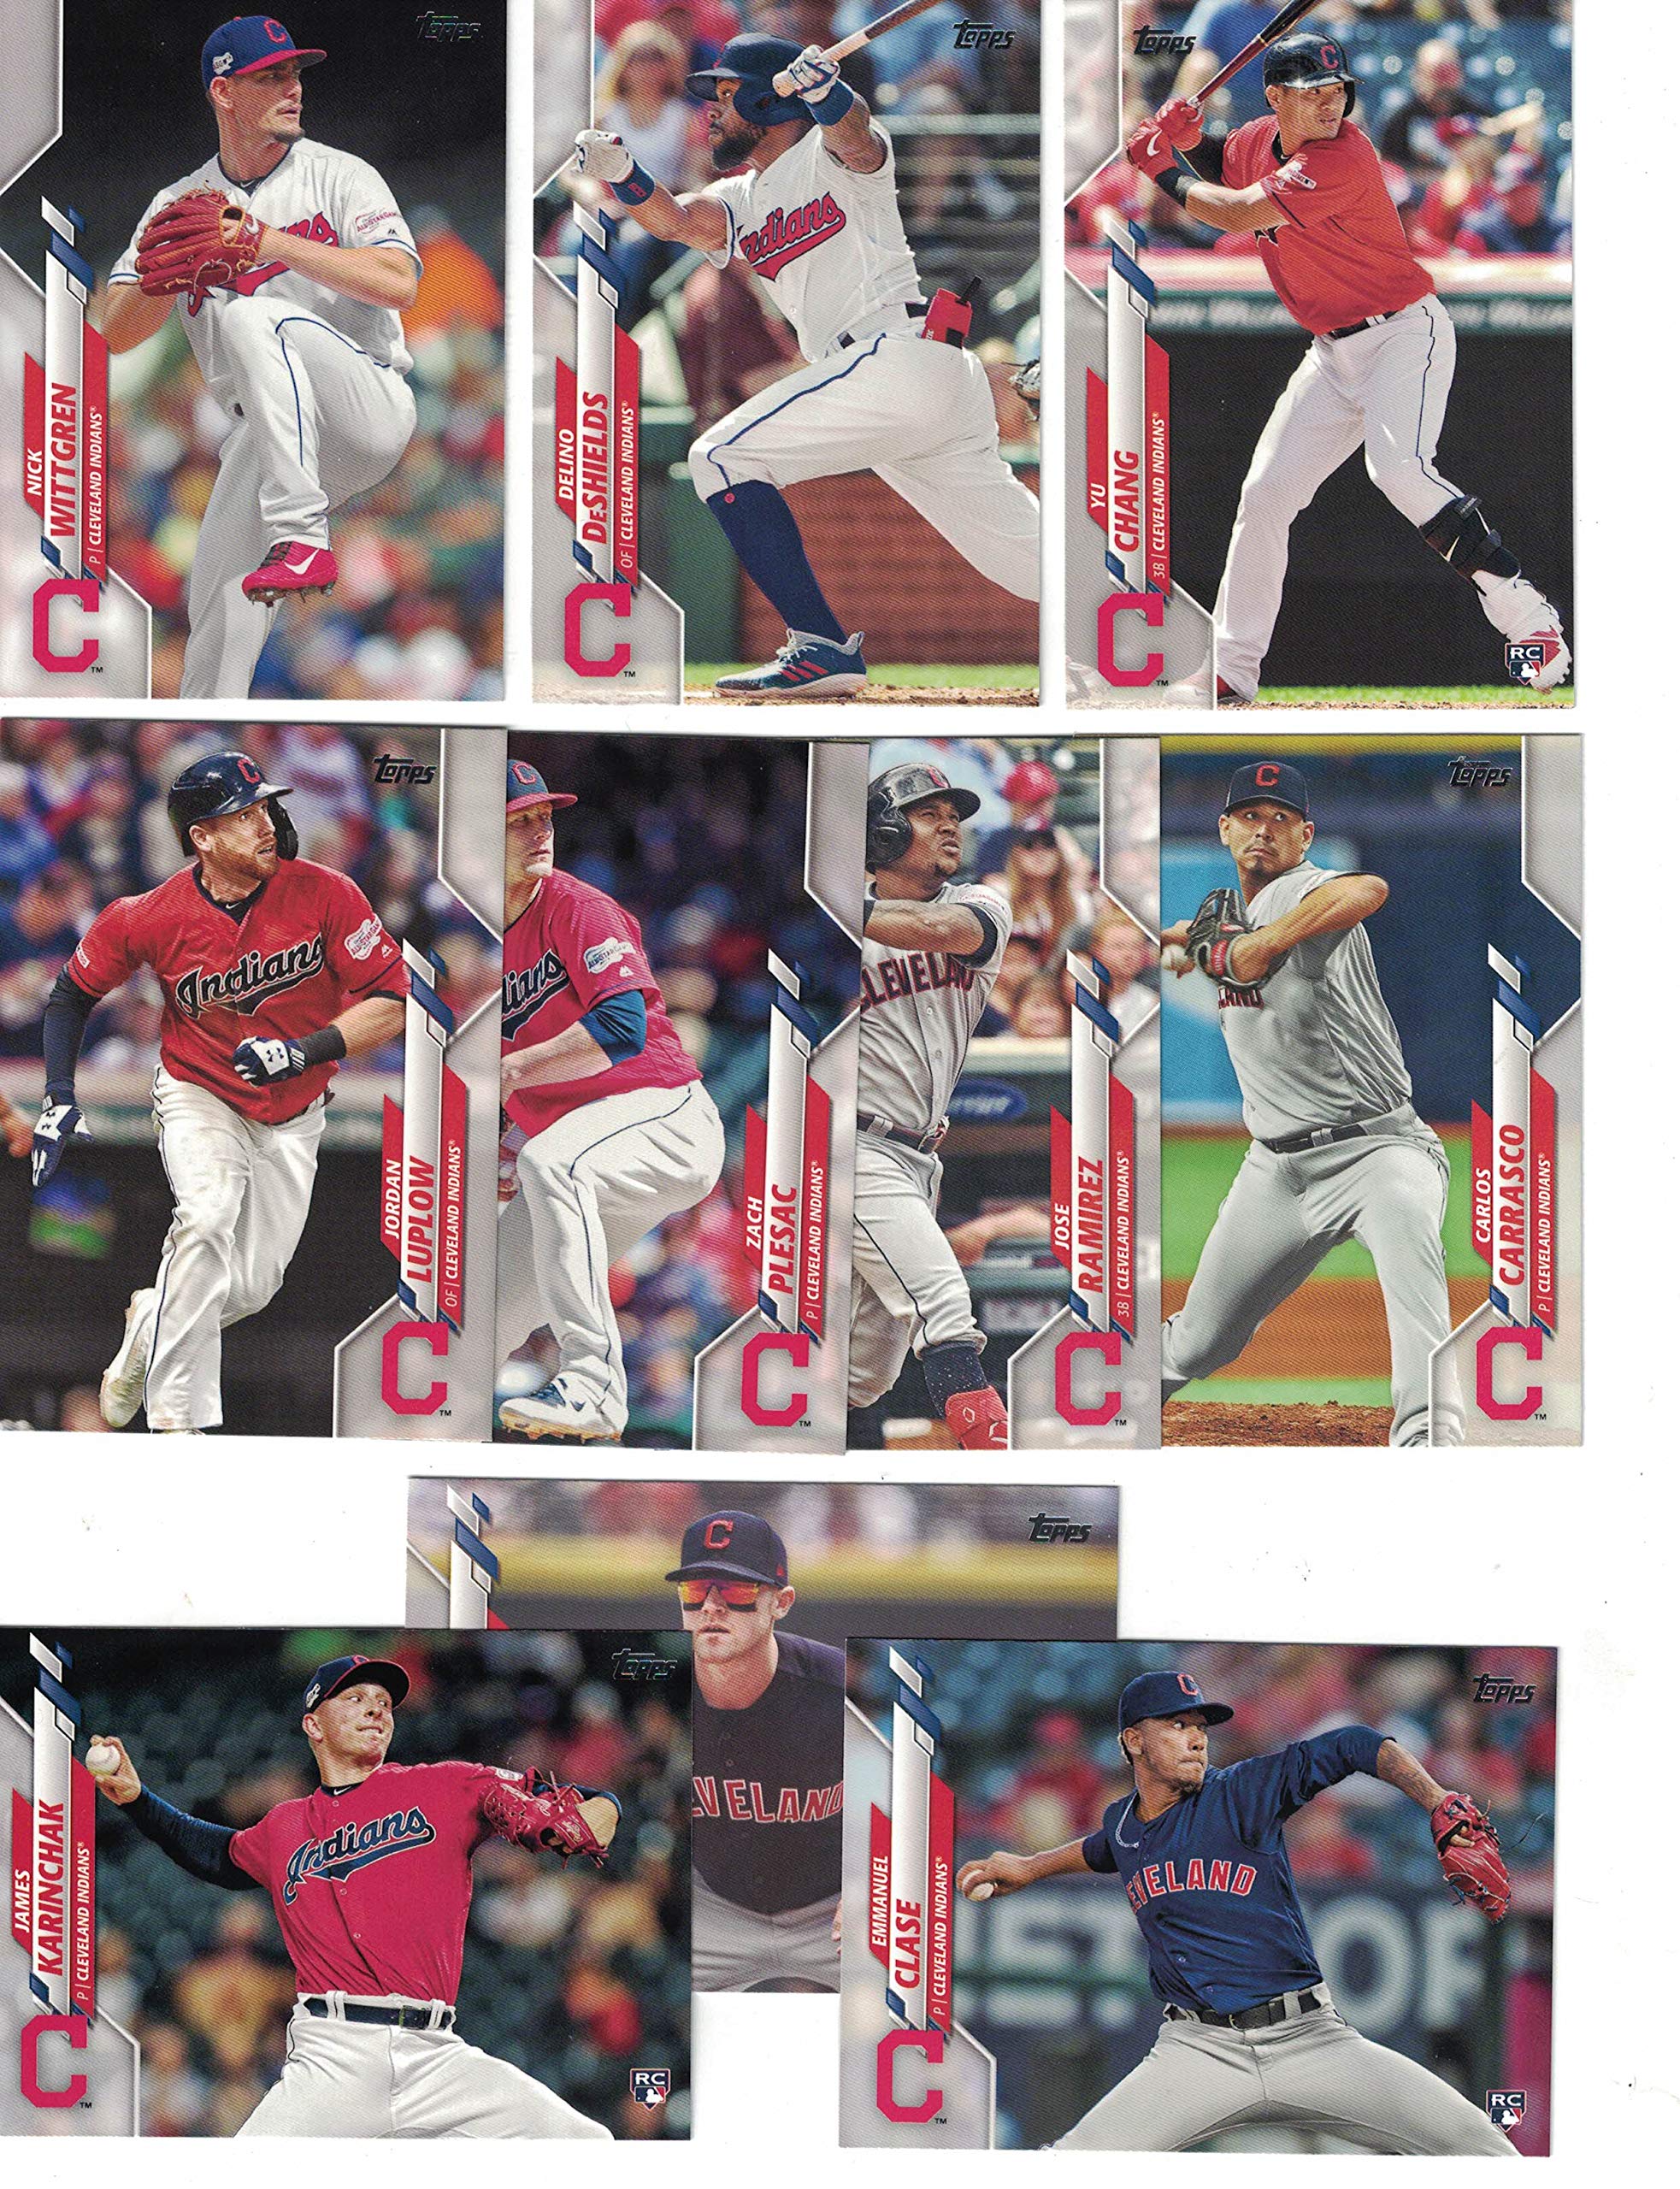 Cleveland Indians/Complete 2020 Topps Indians Baseball Team Set! (24 Cards) Series 1 and 2